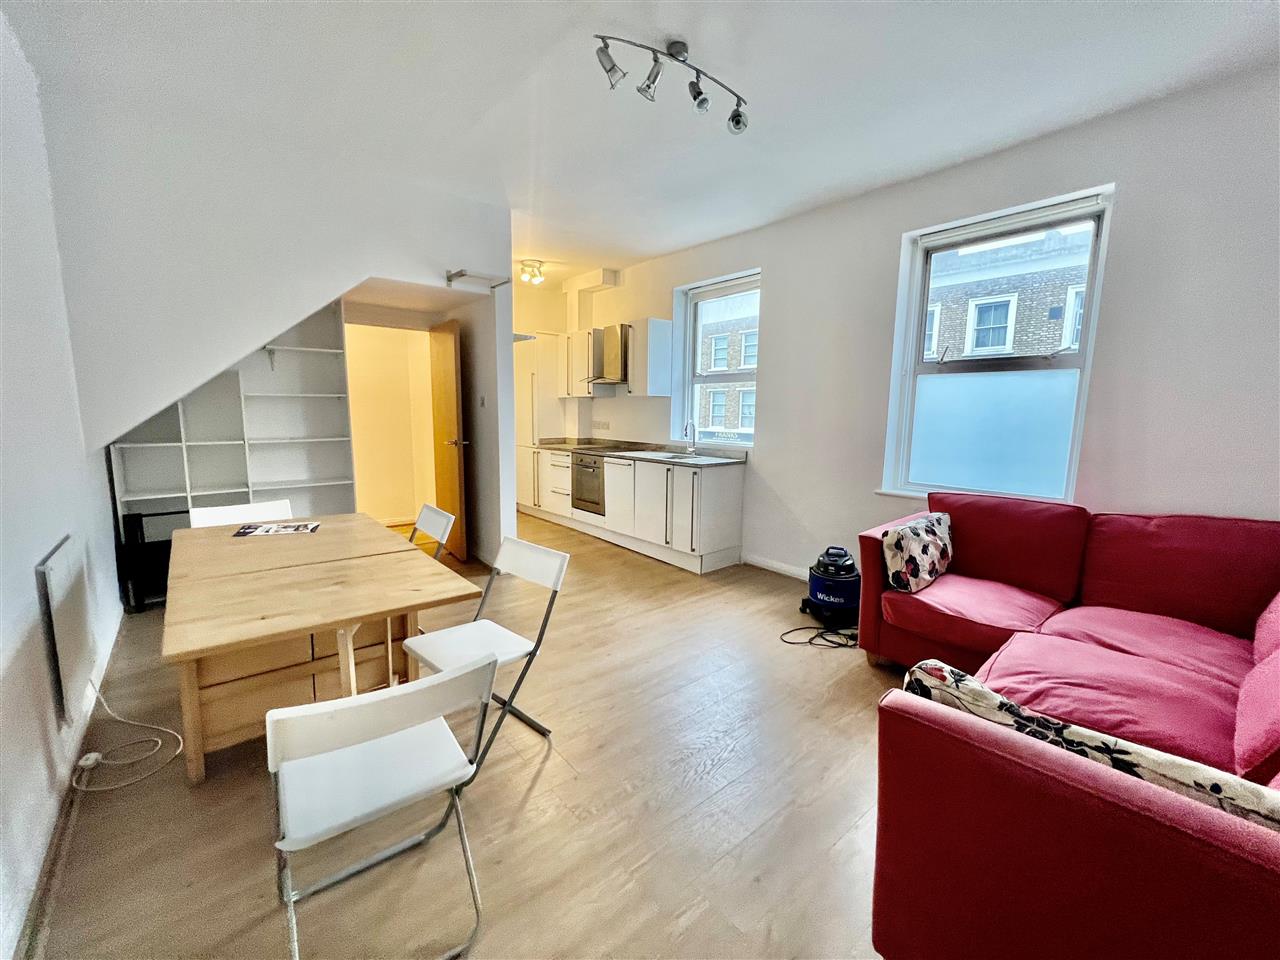 1 bed flat to rent in Queens Crescent - Property Image 1